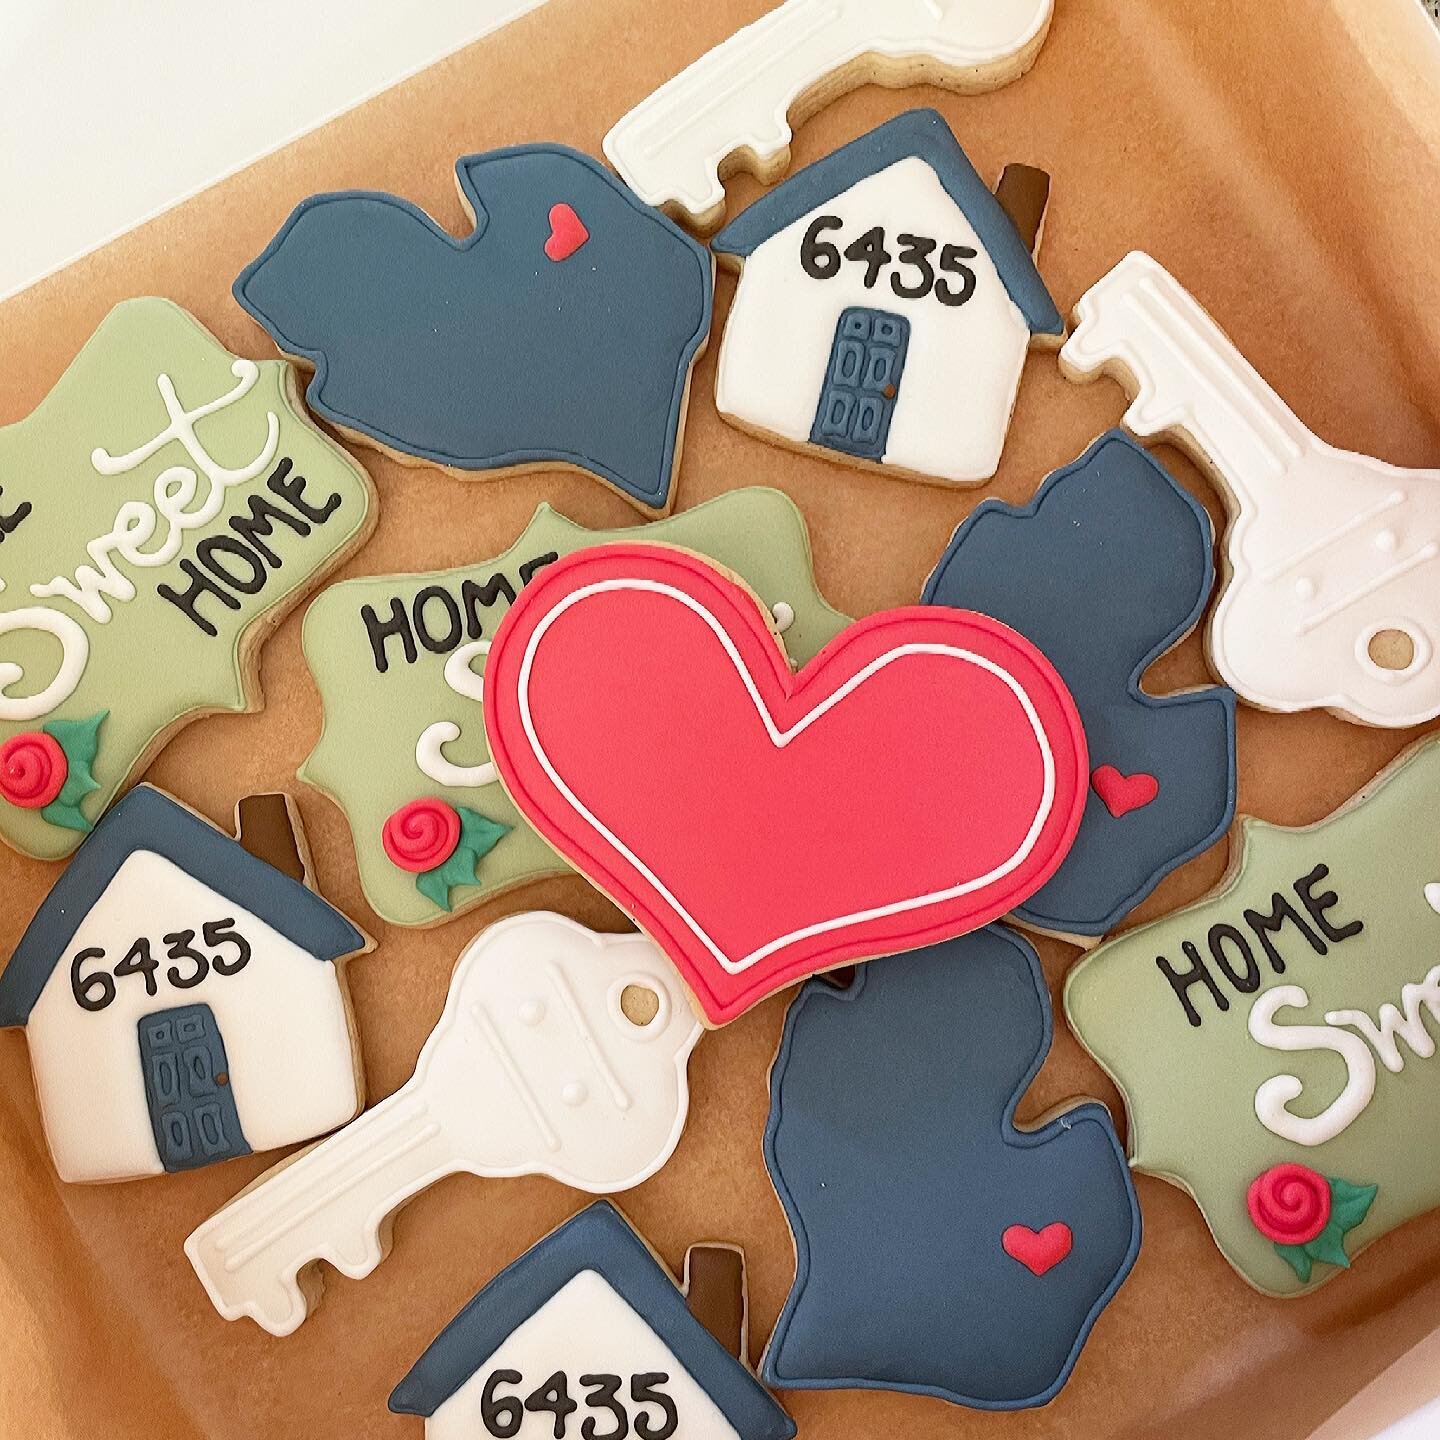 We moved!! 🏠 What an adventure! Jeff and I decided to leave the Big Apple at the beginning of the year to relocate to Michigan, closer to family. Our beautiful friend @jriley8213 made us these yummy cookies to mark the occasion. Such a wonderful sur